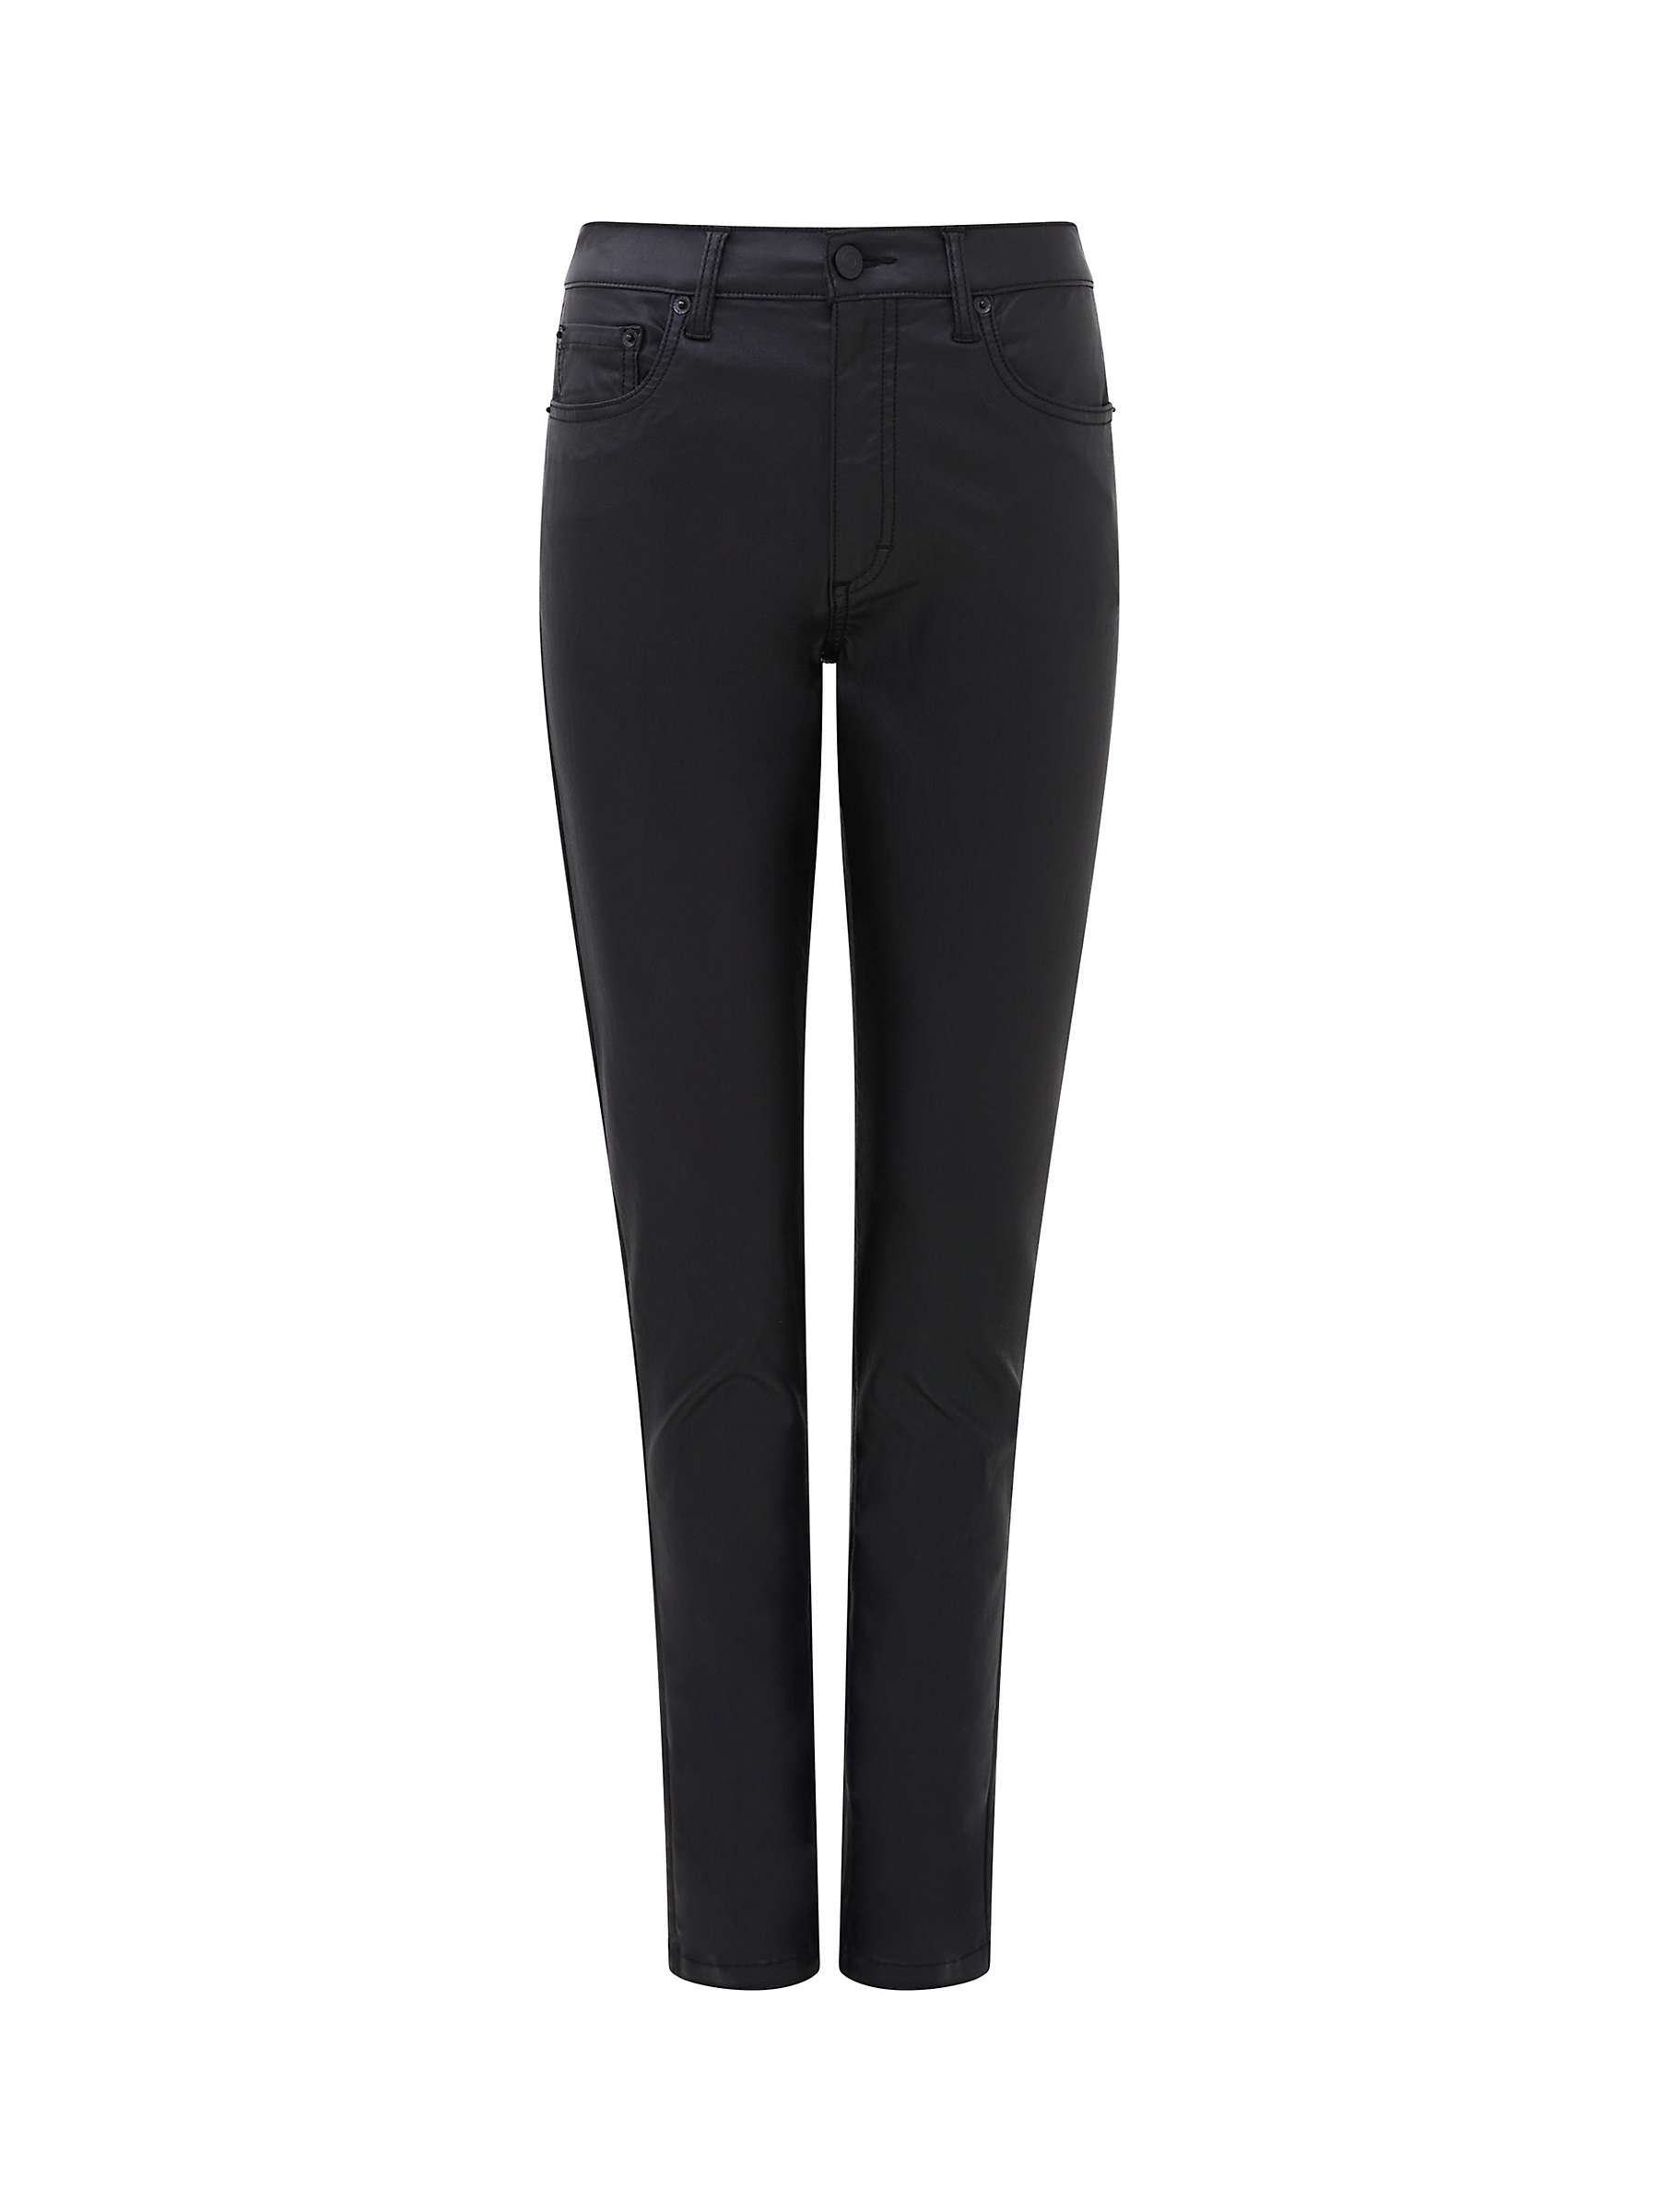 Buy French Connection Cotton Blend Rebound Gloss Jeans, Blackout Online at johnlewis.com